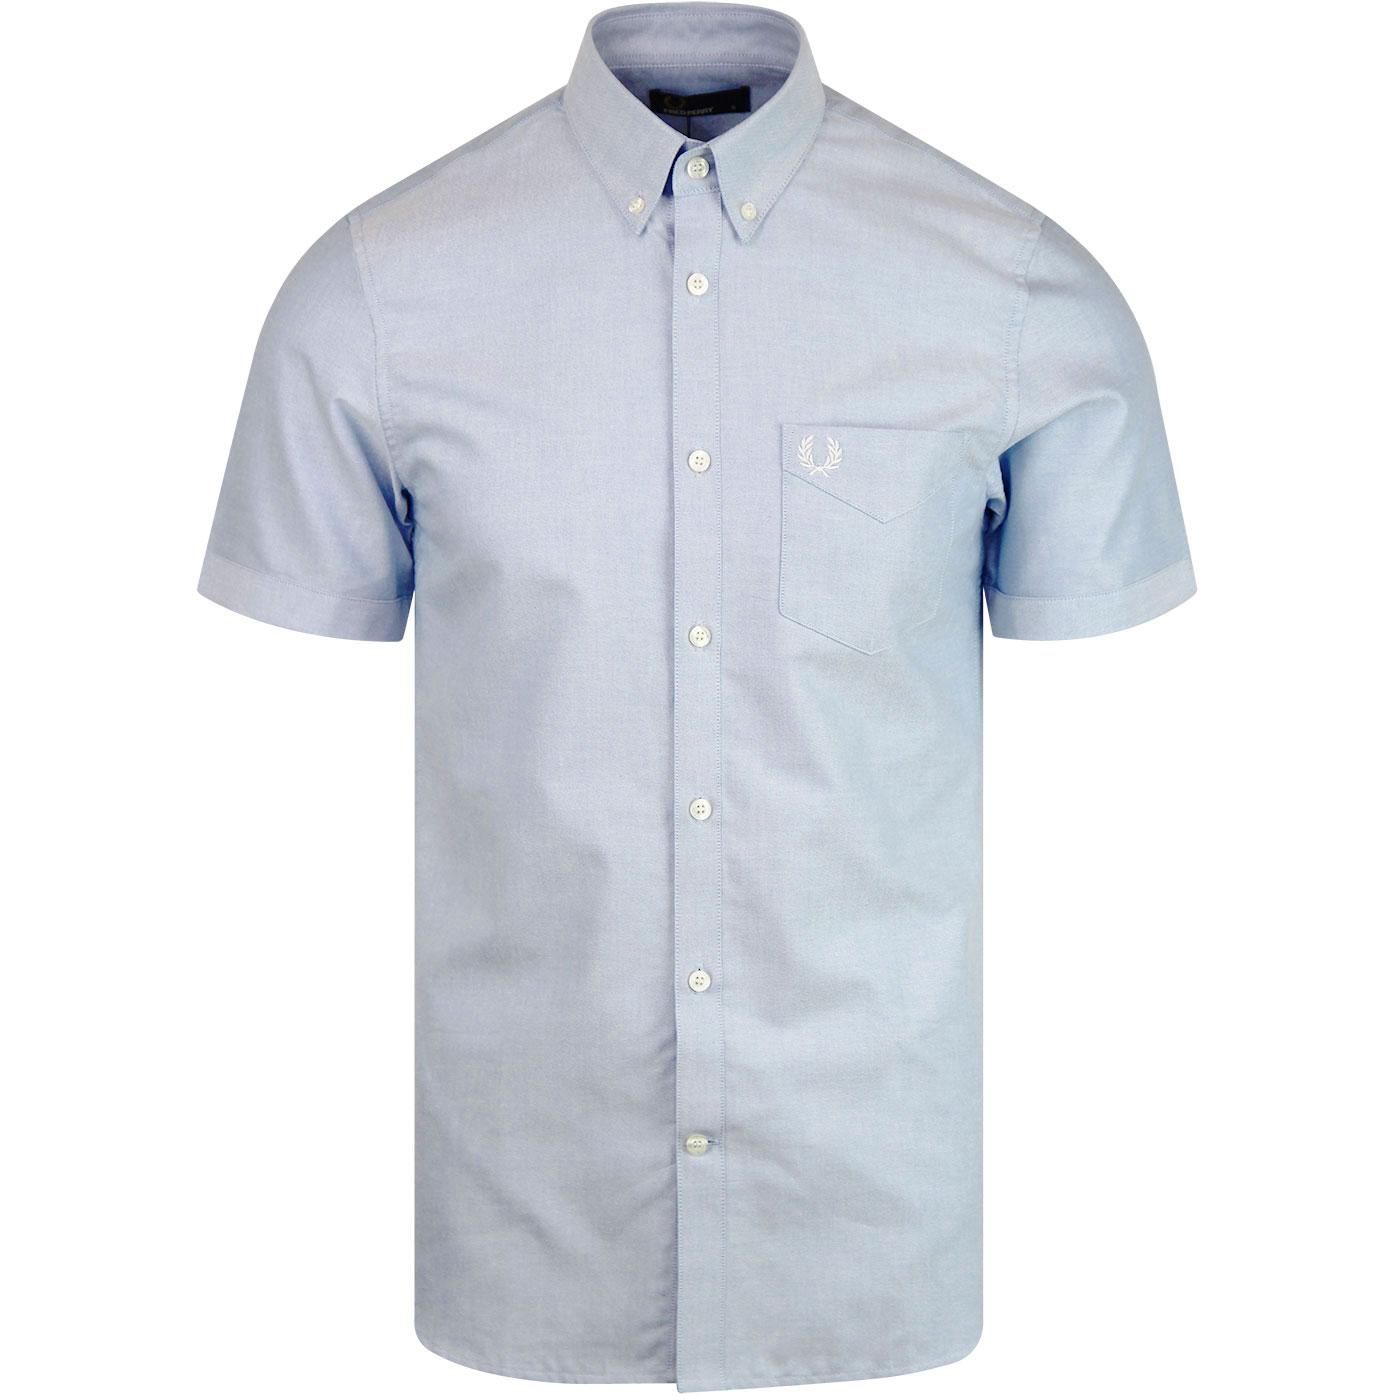 FRED PERRY Classic Mod Short Sleeve Retro Oxford Shirt LS